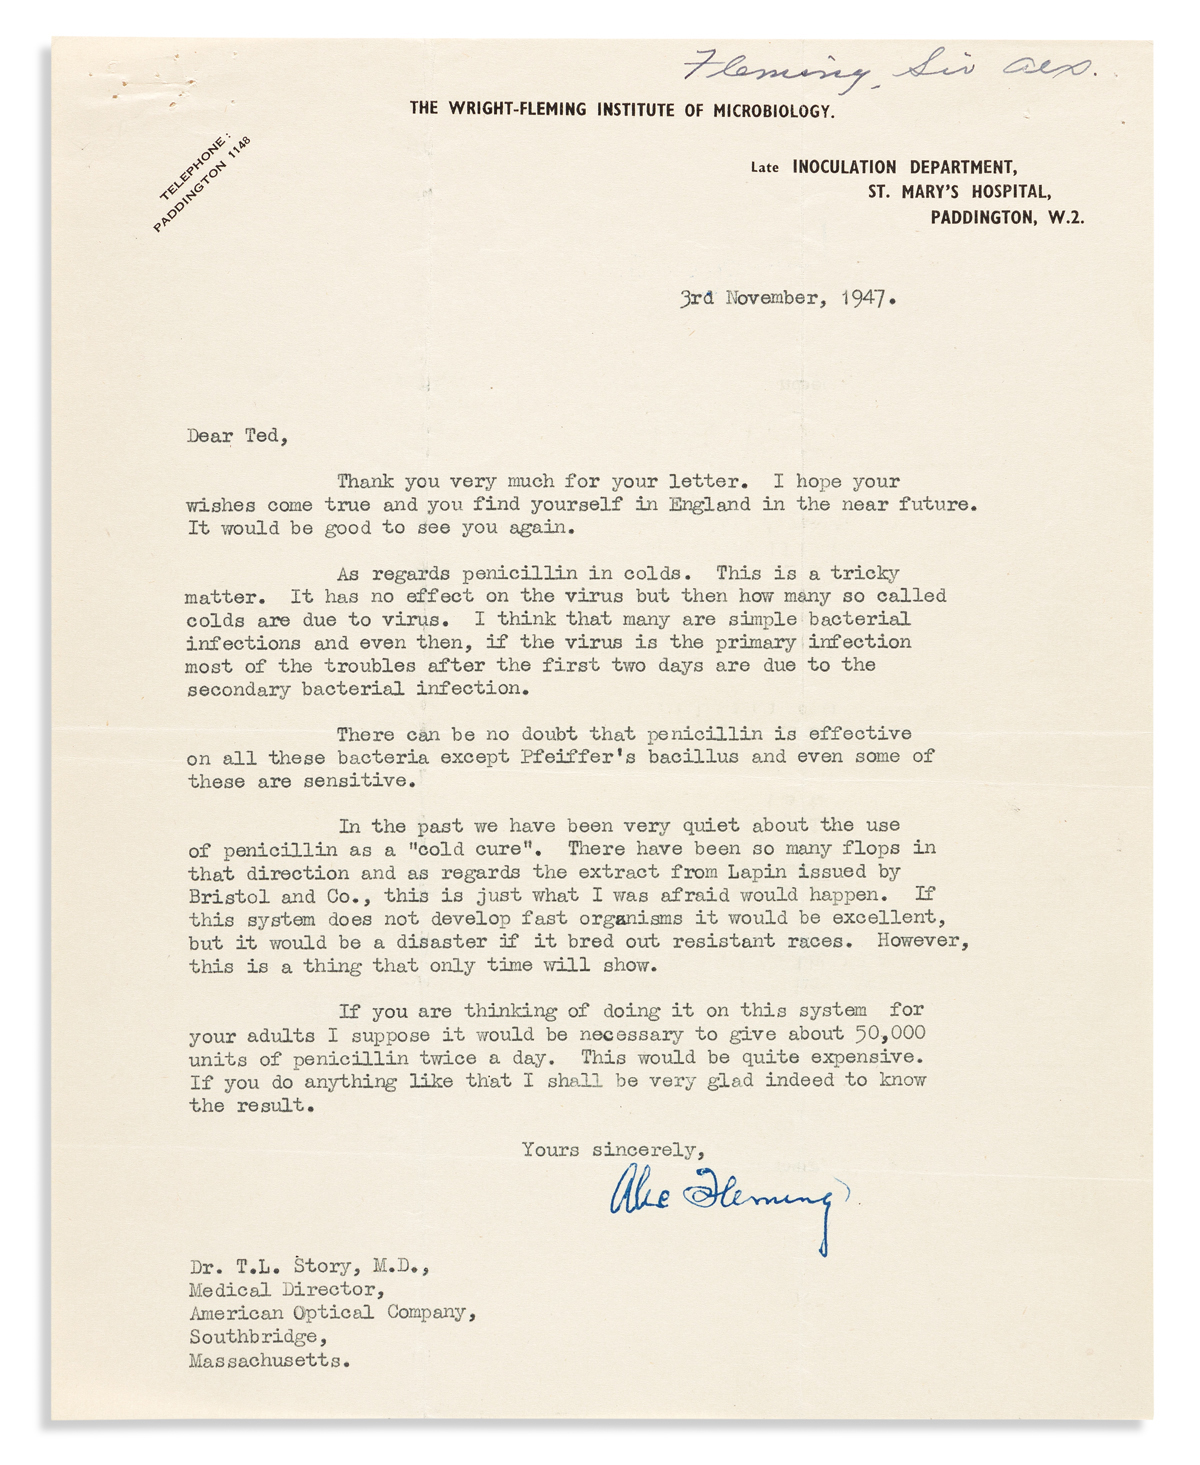 (MEDICINE.) FLEMING, ALEXANDER. Typed Letter Signed, Alex Fleming, to Dr. Theodore L. Story (Dear Ted),